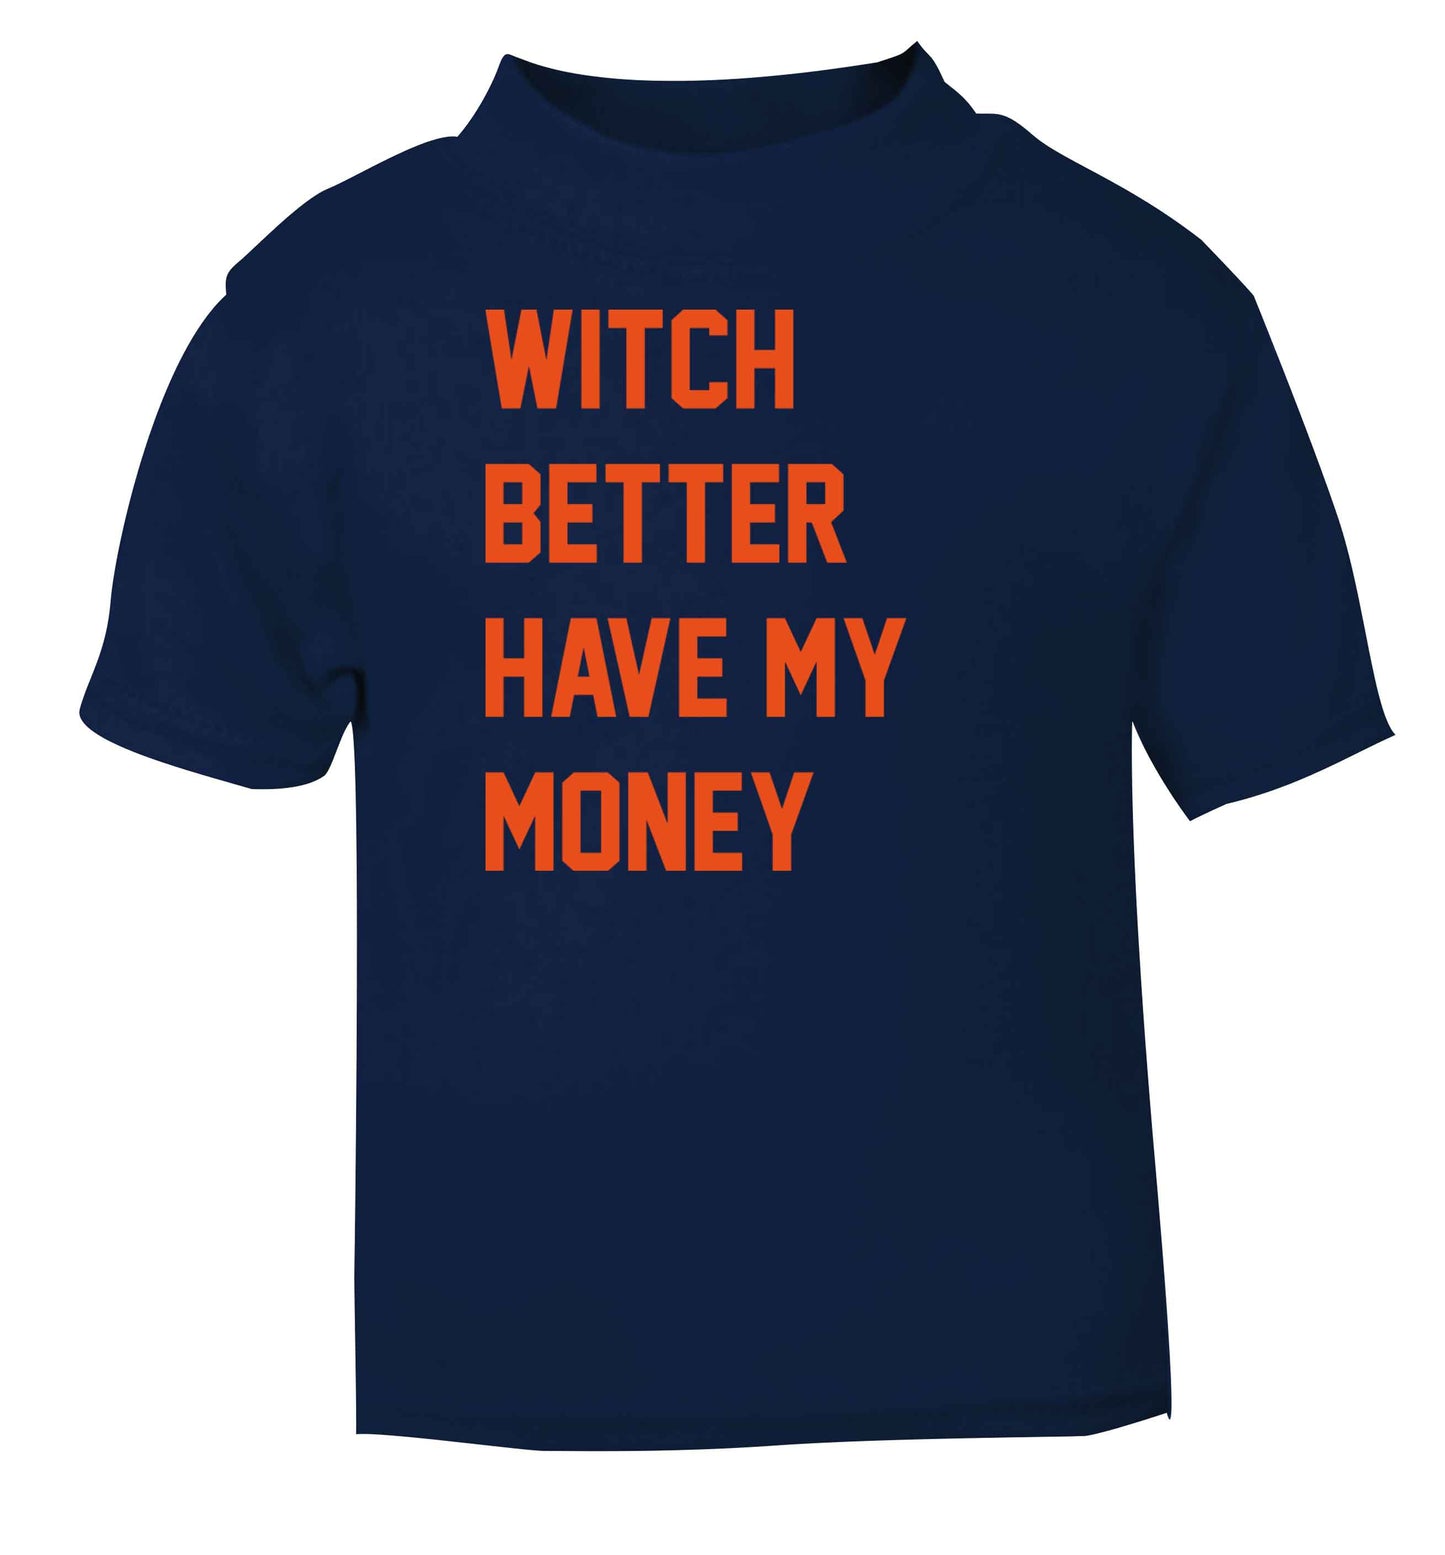 Witch better have my money navy baby toddler Tshirt 2 Years